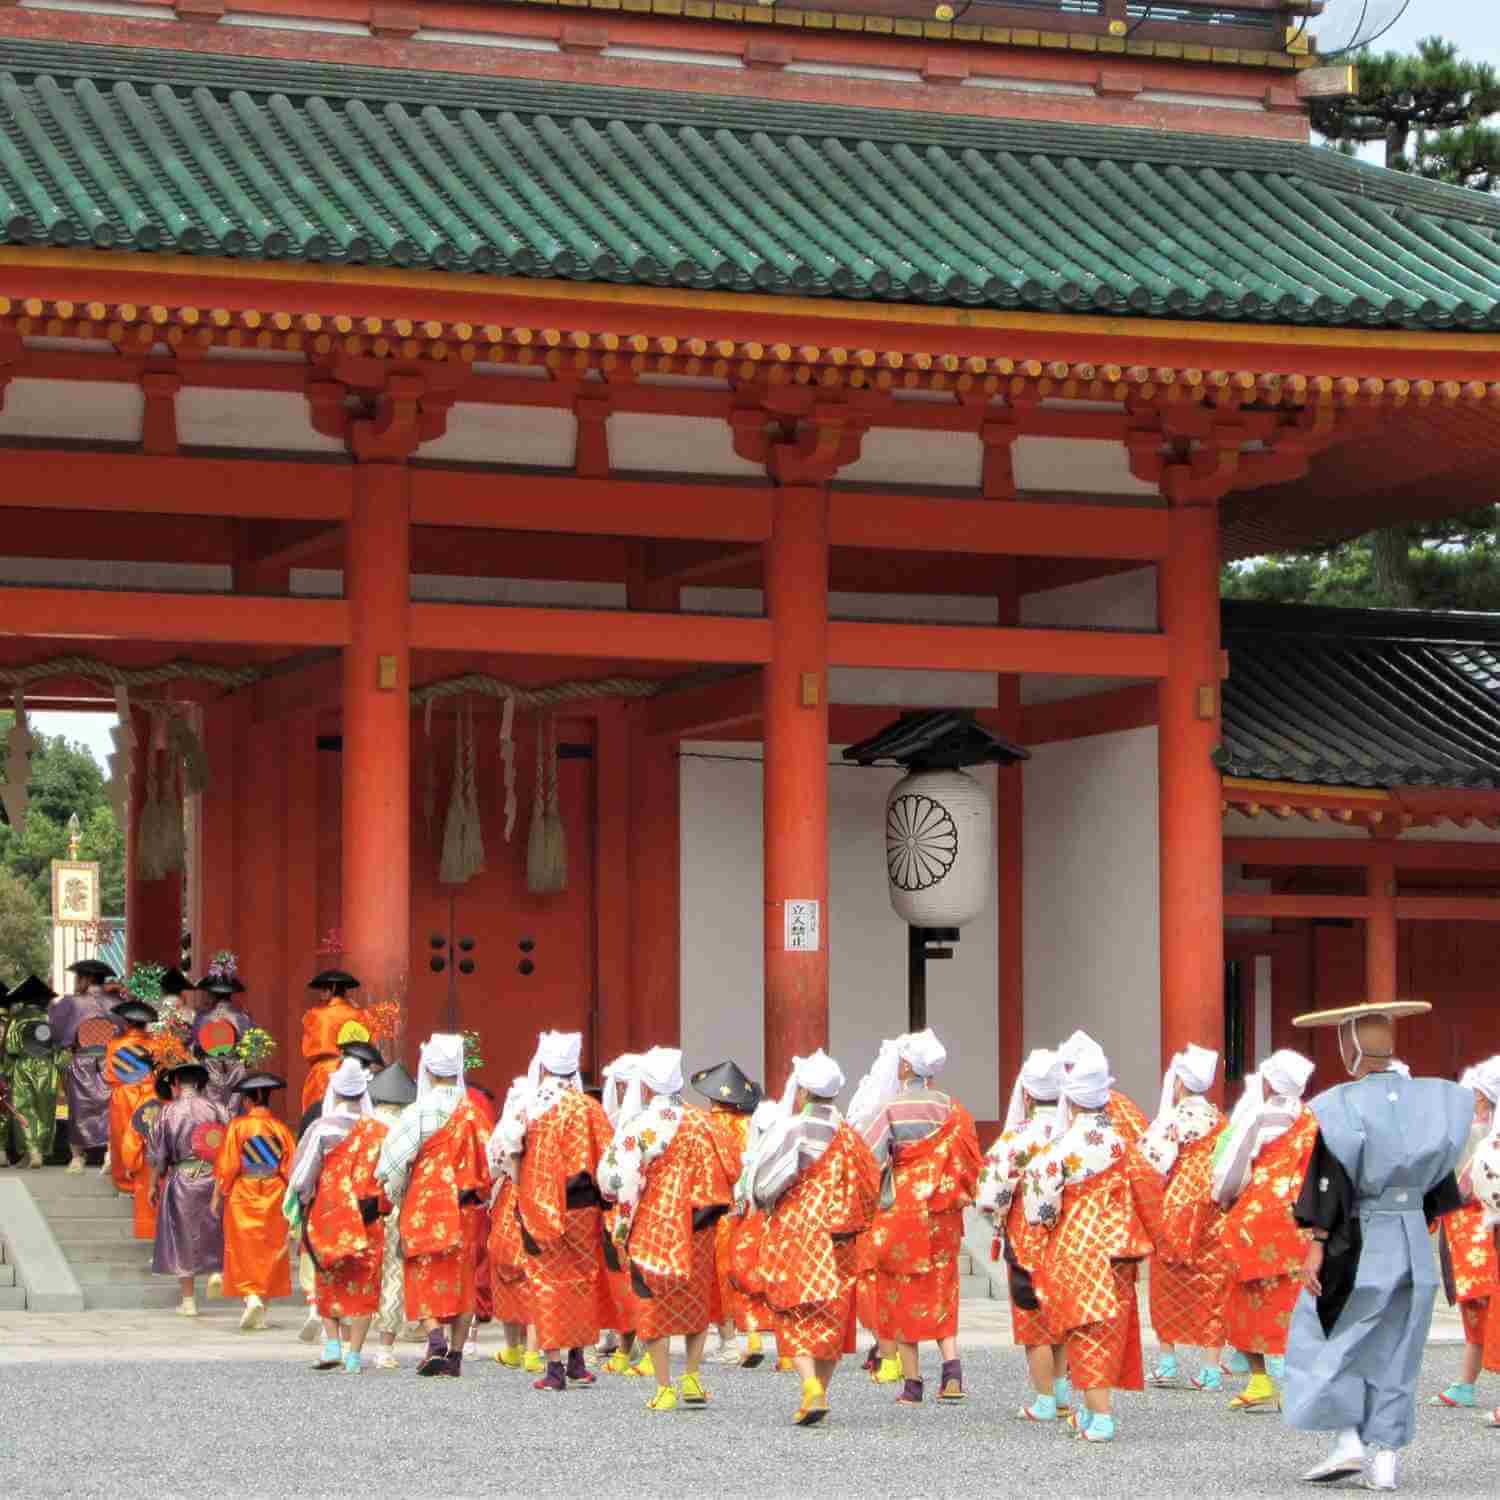 The Jidai Matsuri Festival is a traditional Japanese festival held annually on October 22 in Kyoto, Japan = Shutterstock 10